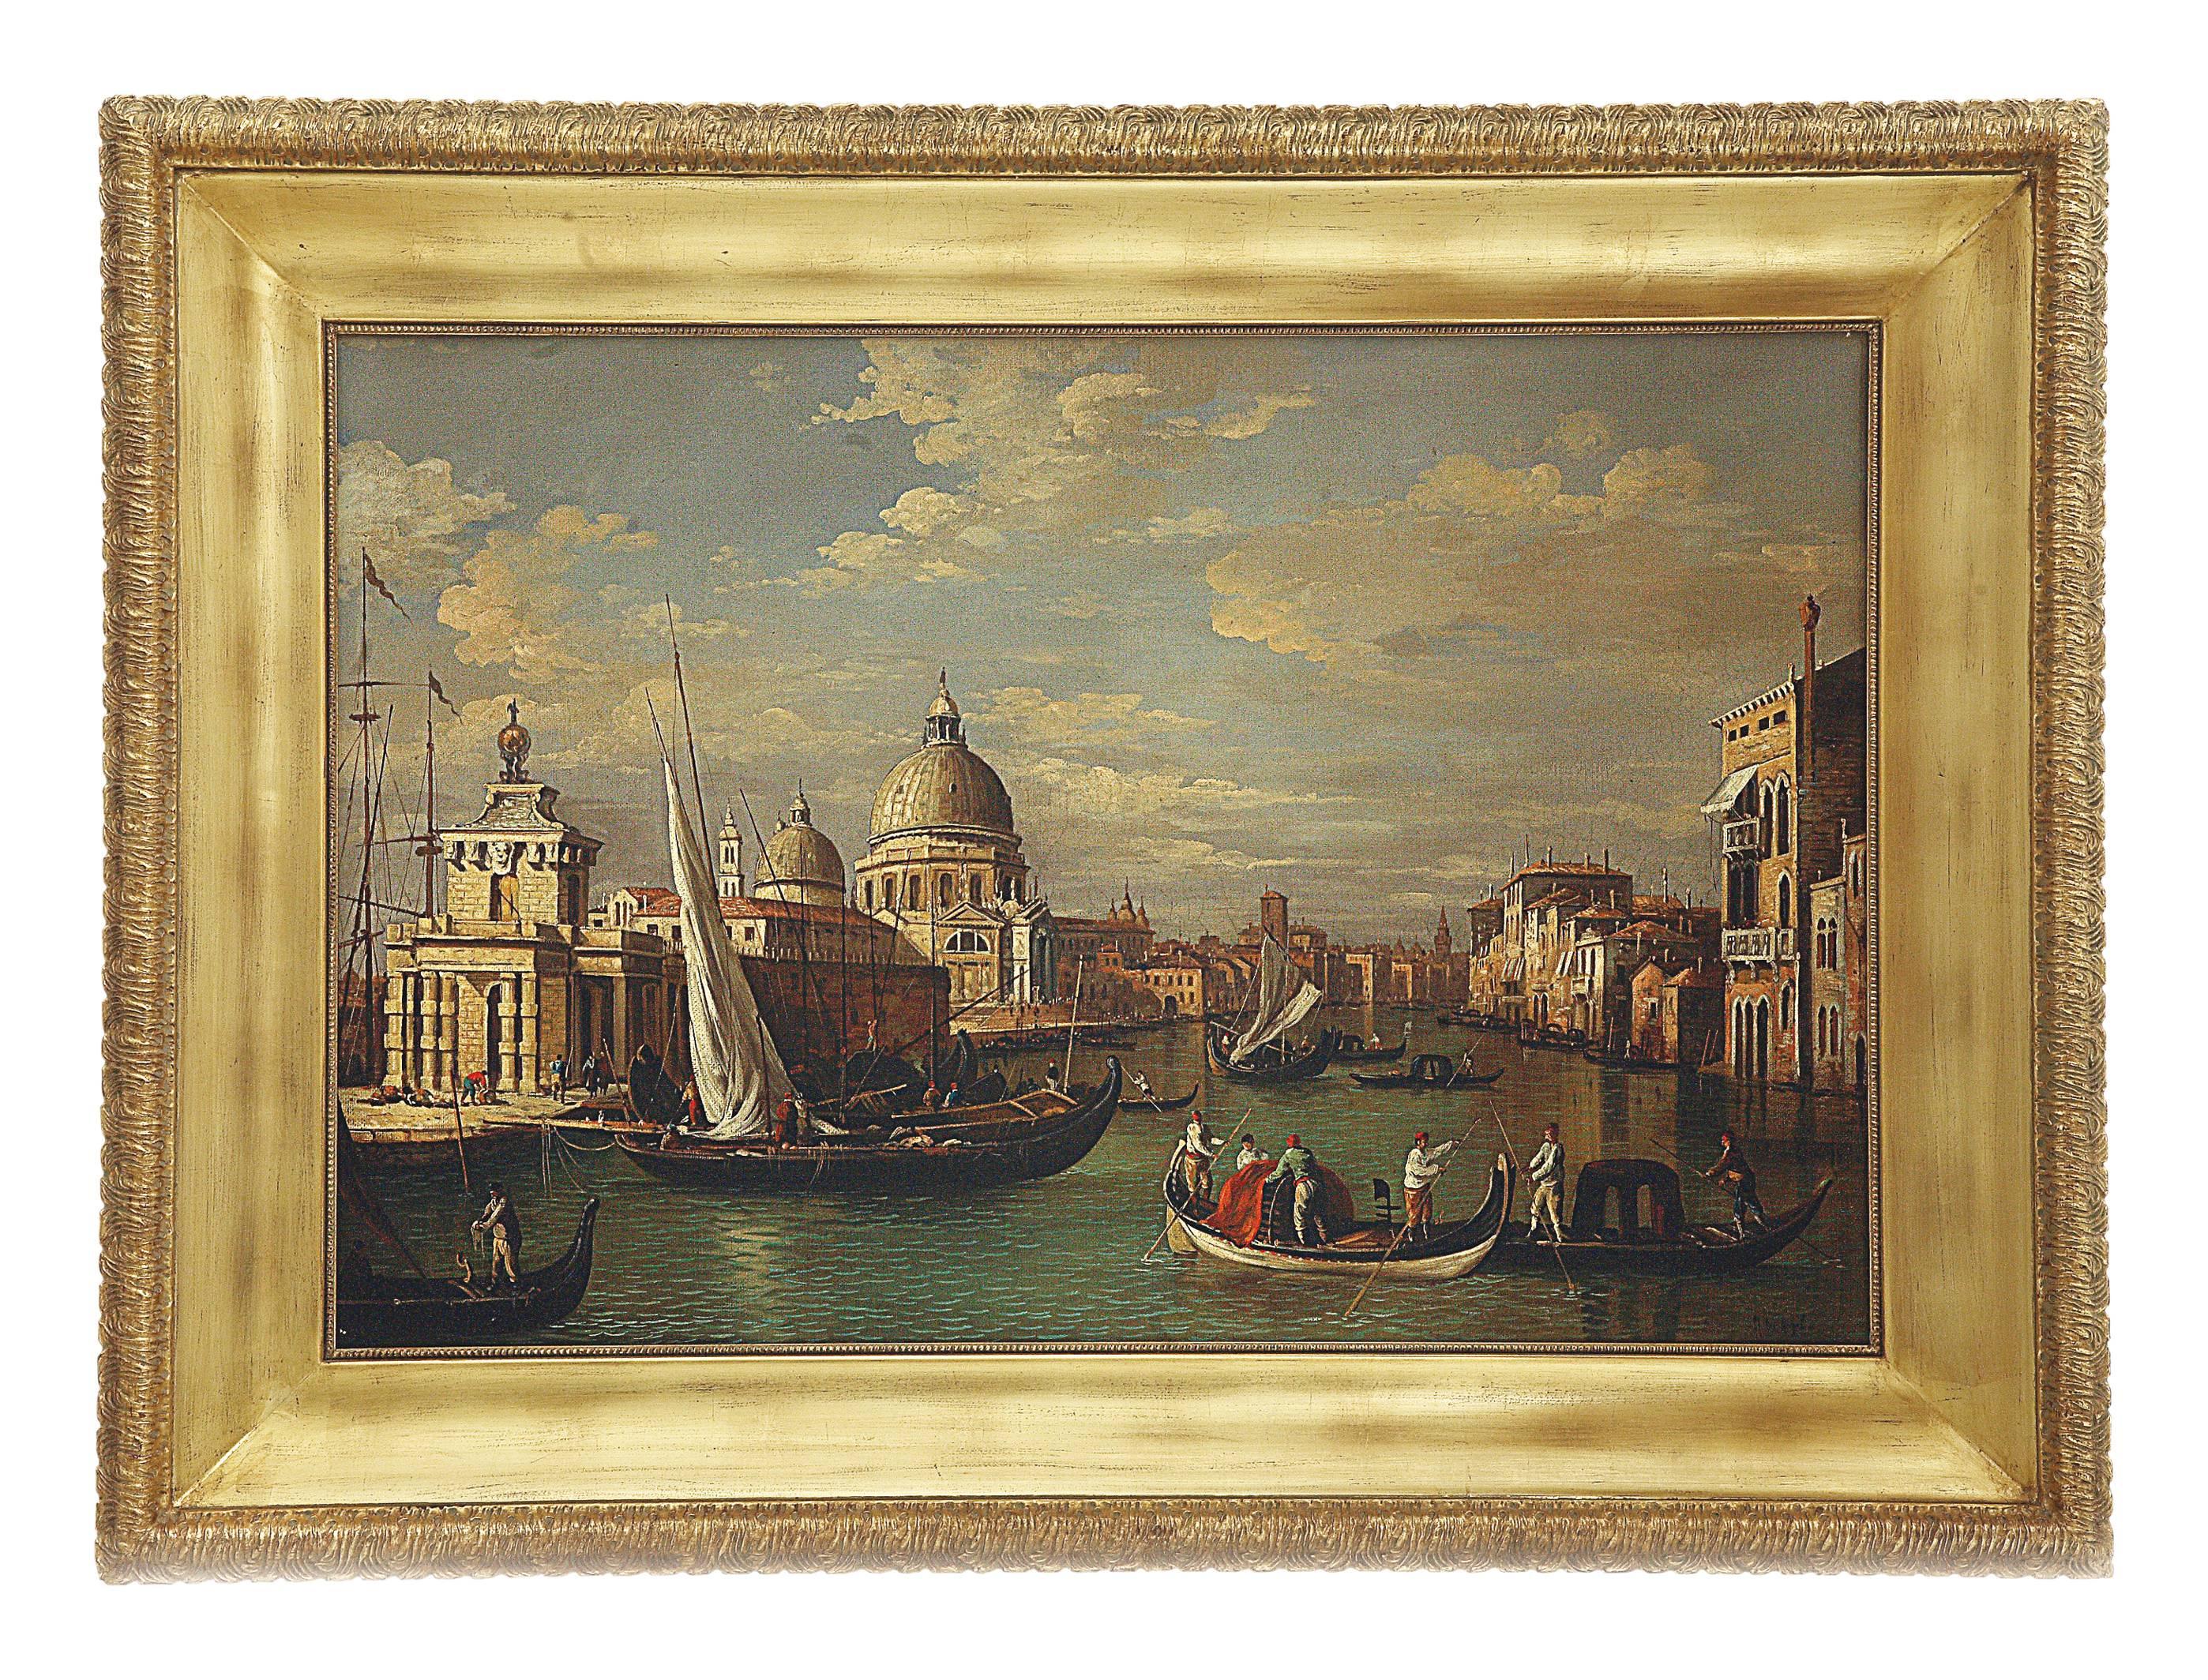 VENICE -In the Manner of Canaletto- Italian Landscape Oil on Canvas Painting 